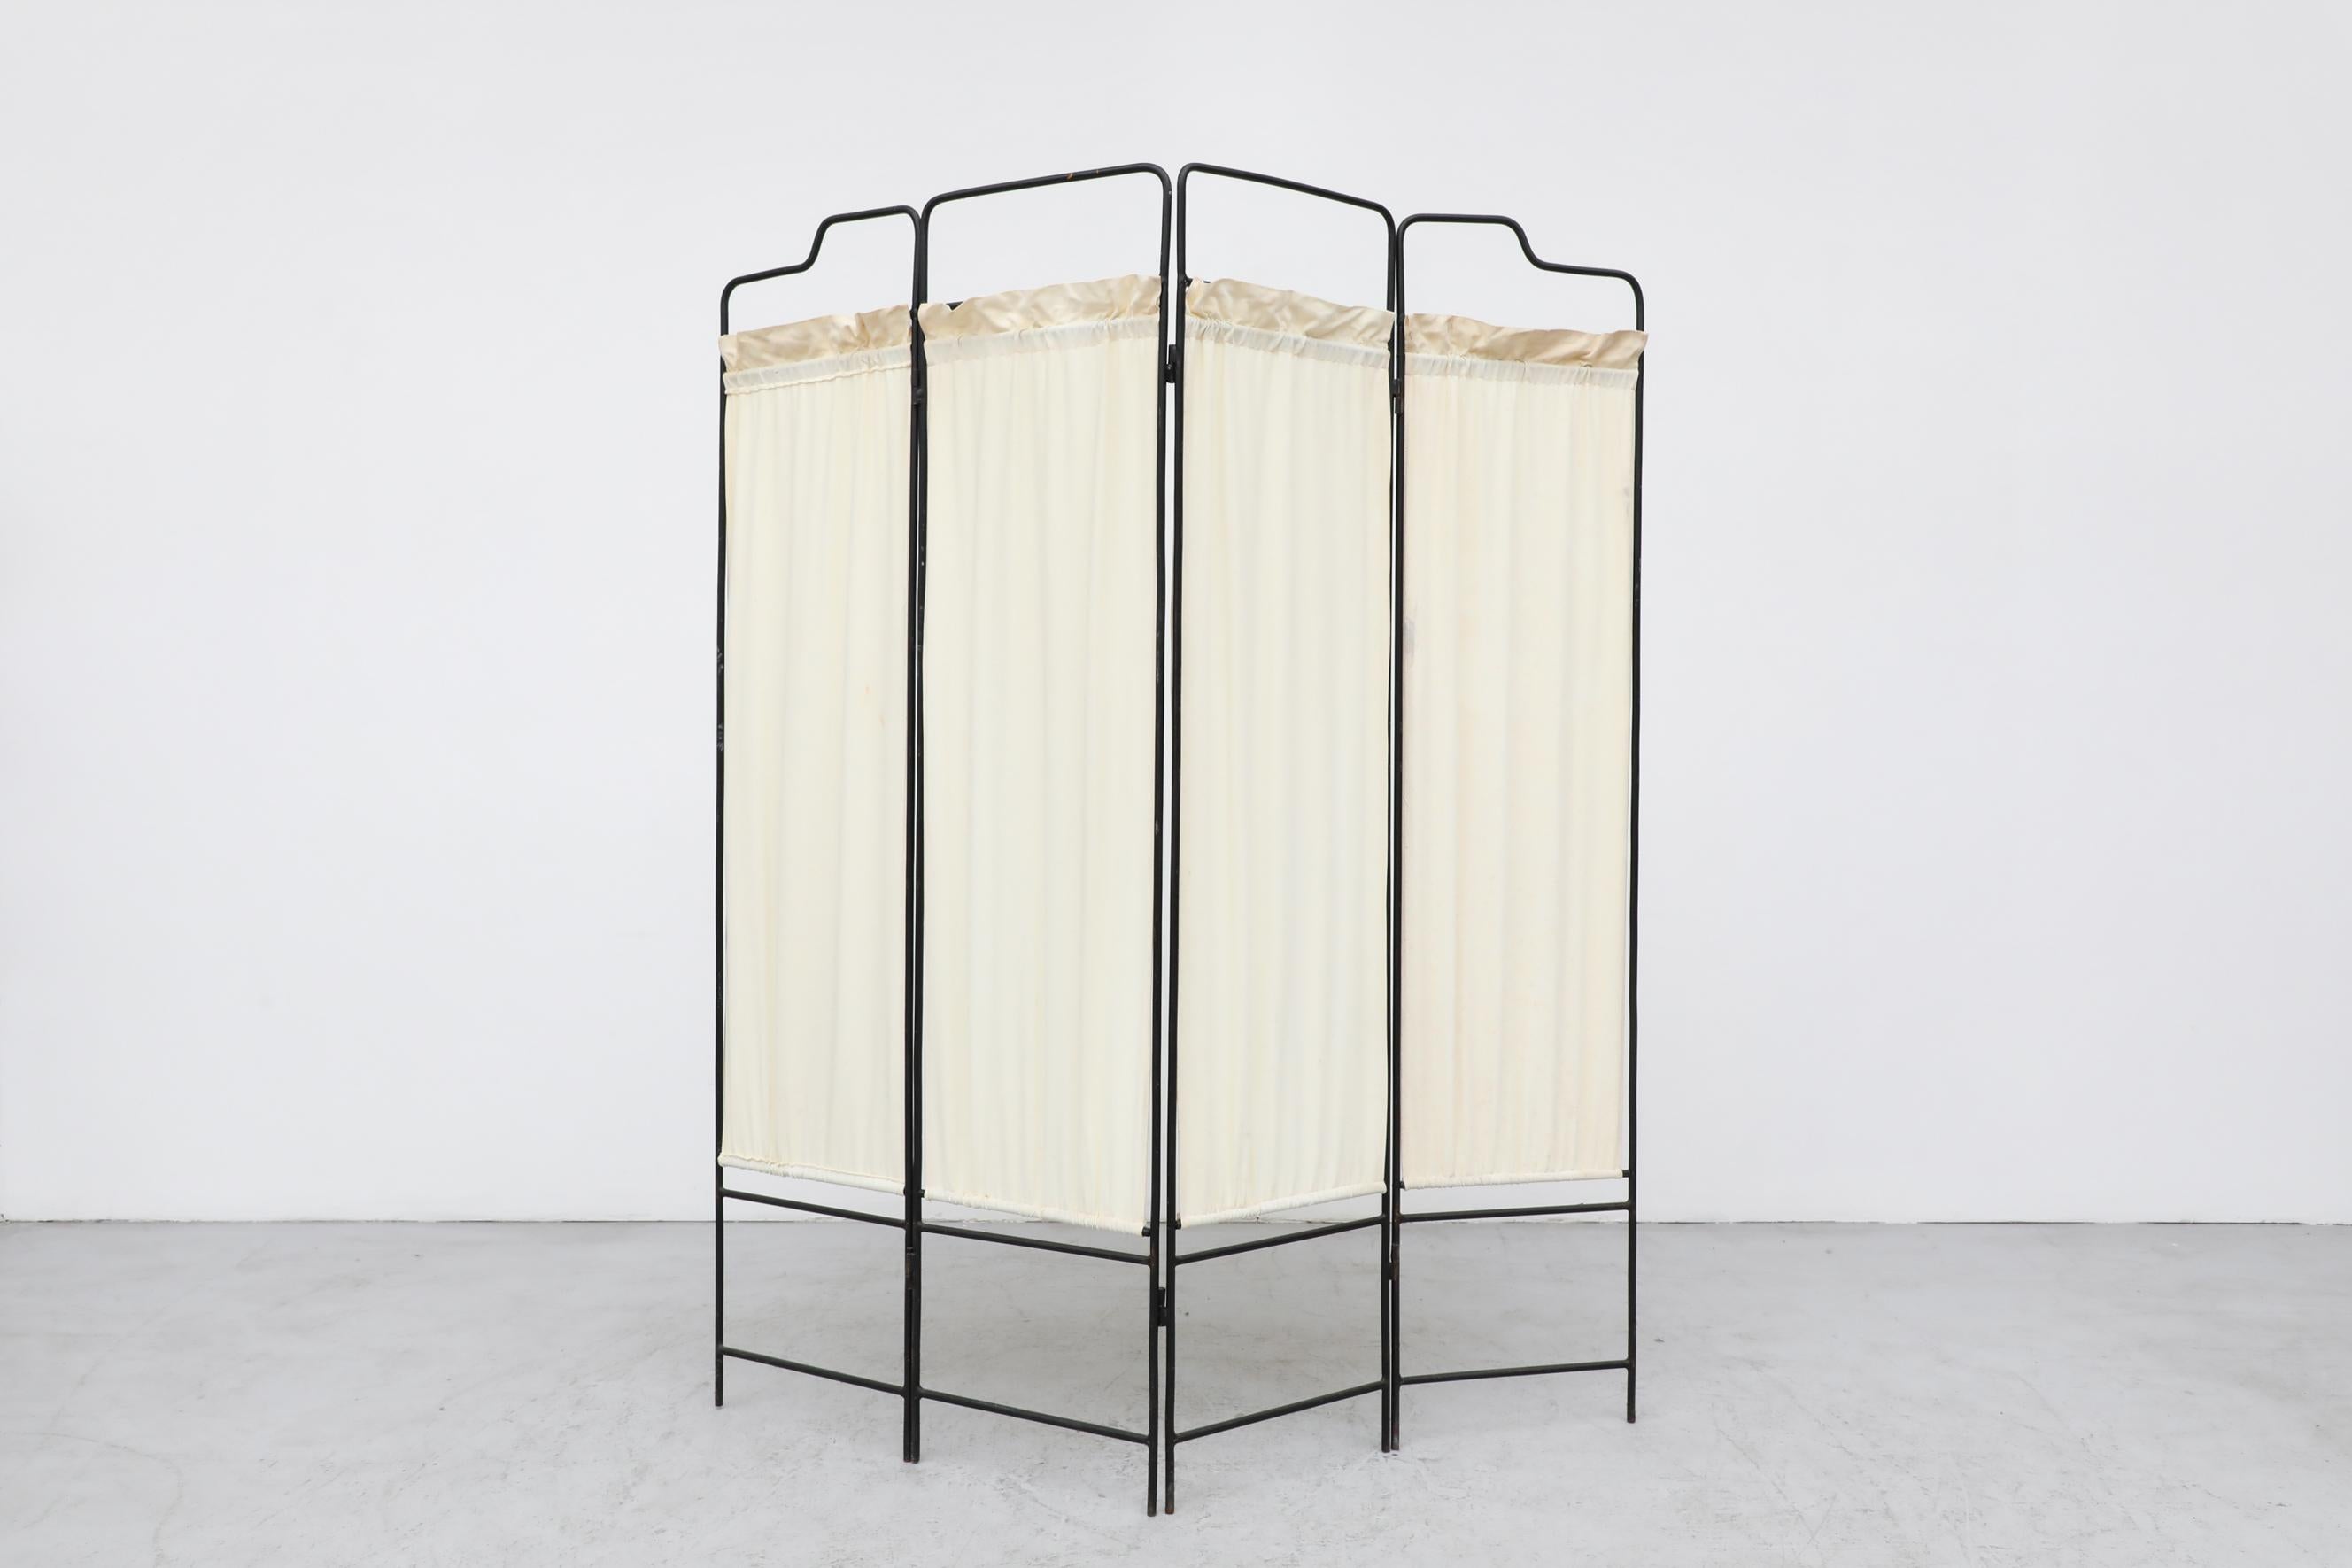 Deco Folding Privacy Screen with Stylized Black Iron Frame. Four Folding Panels each with Inset Cream Fabric, Fabric, not original to the screen, yet visibly vintage. Visible Wear is consistent with its age and use.